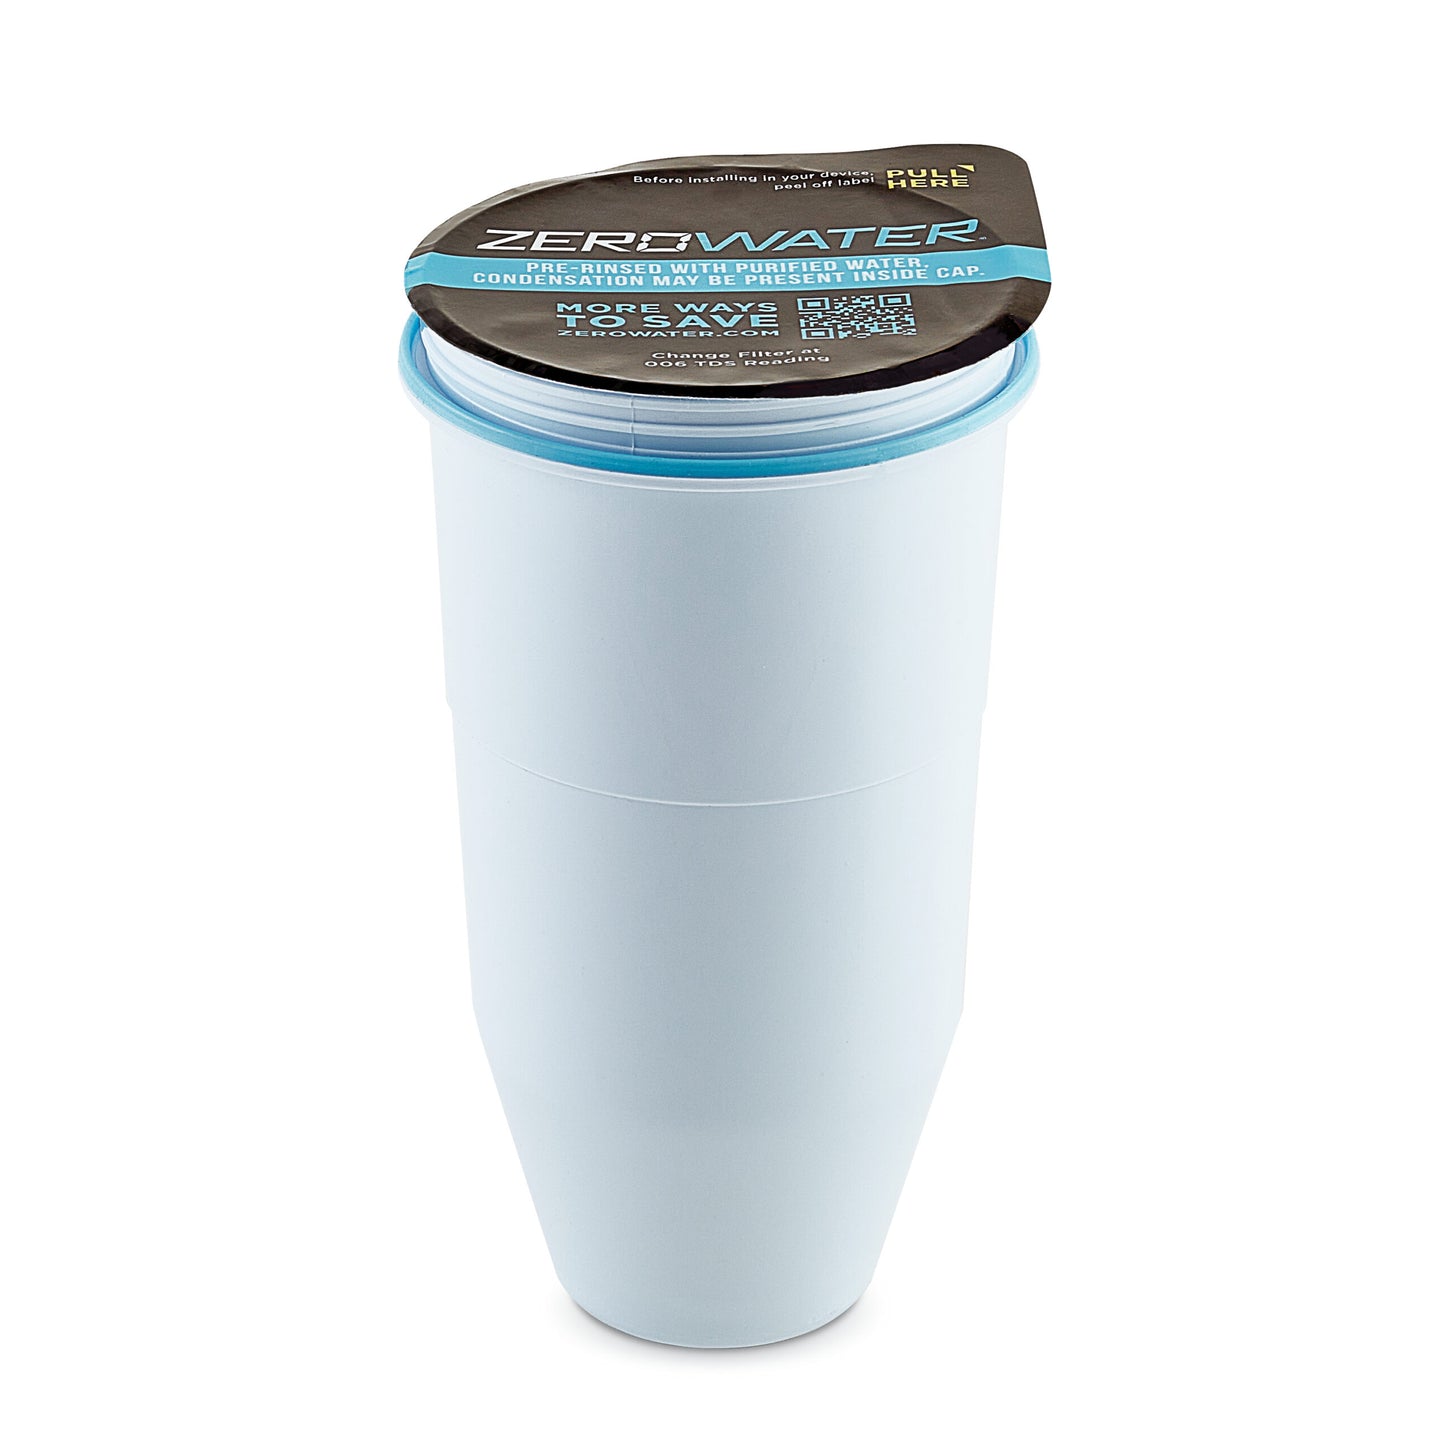 ZeroWater - Replacement Filter